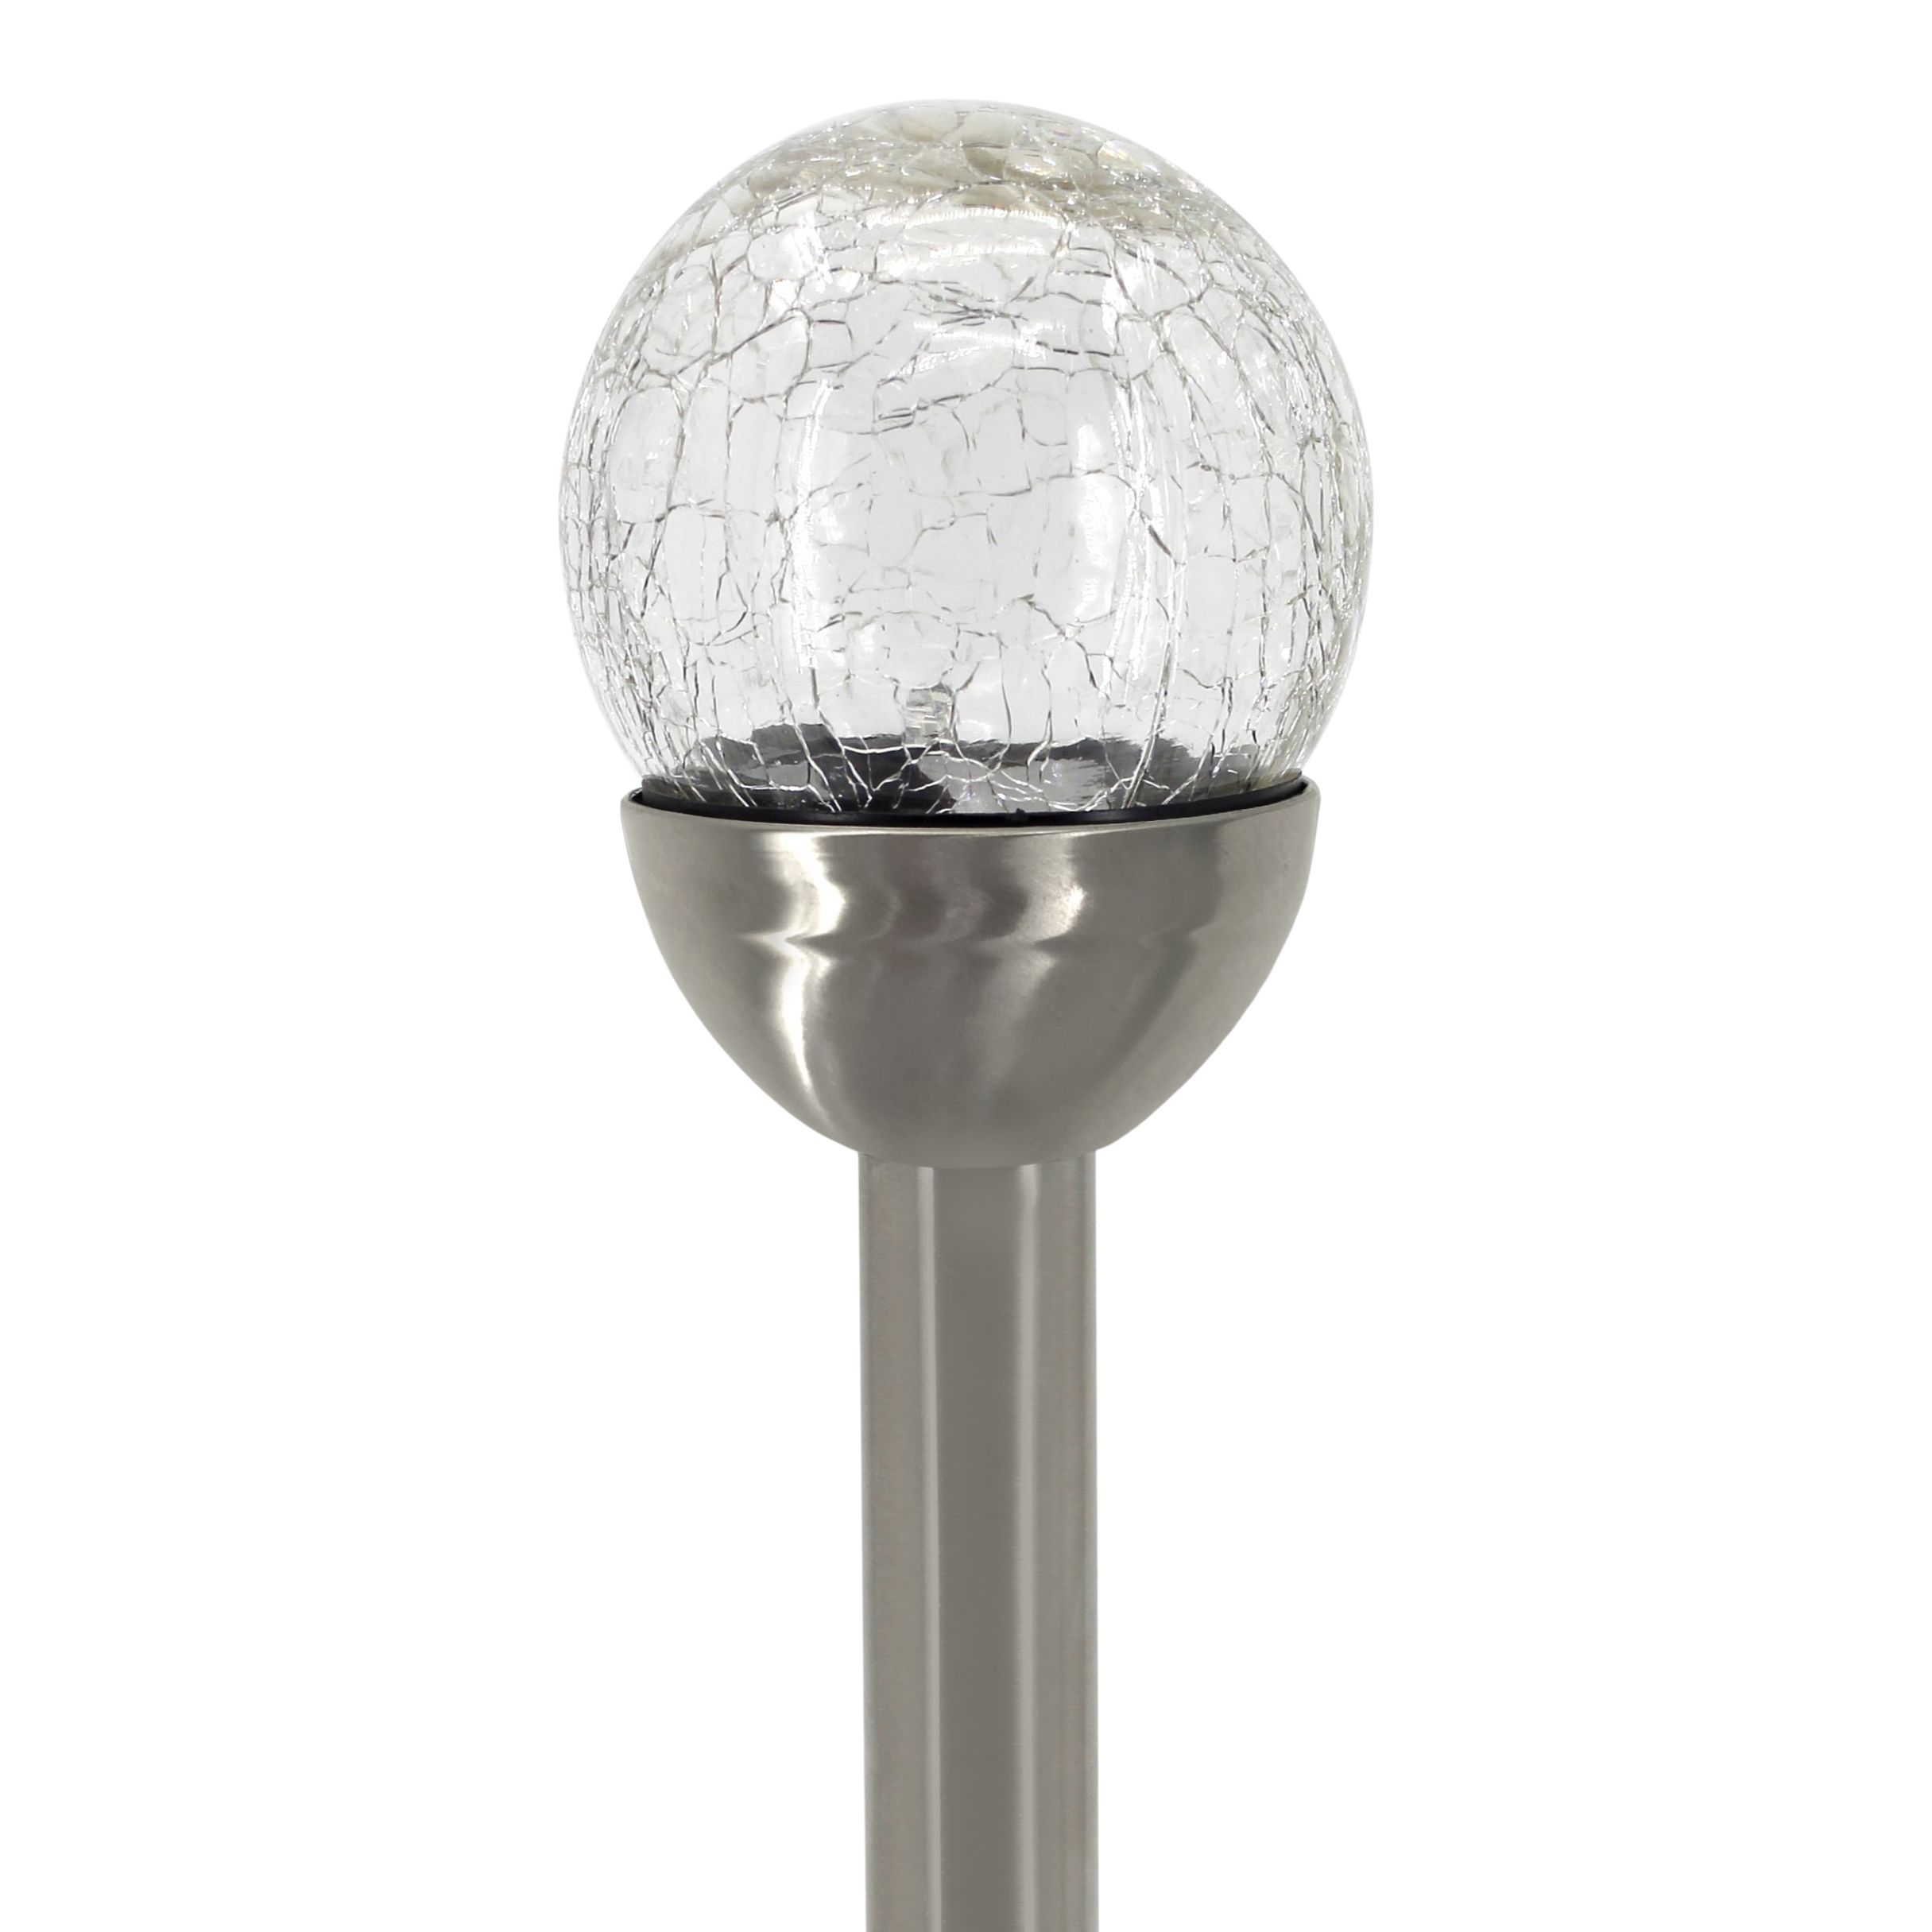 Silver & clear Crackle effect Solar-powered Integrated LED Outdoor Stake light